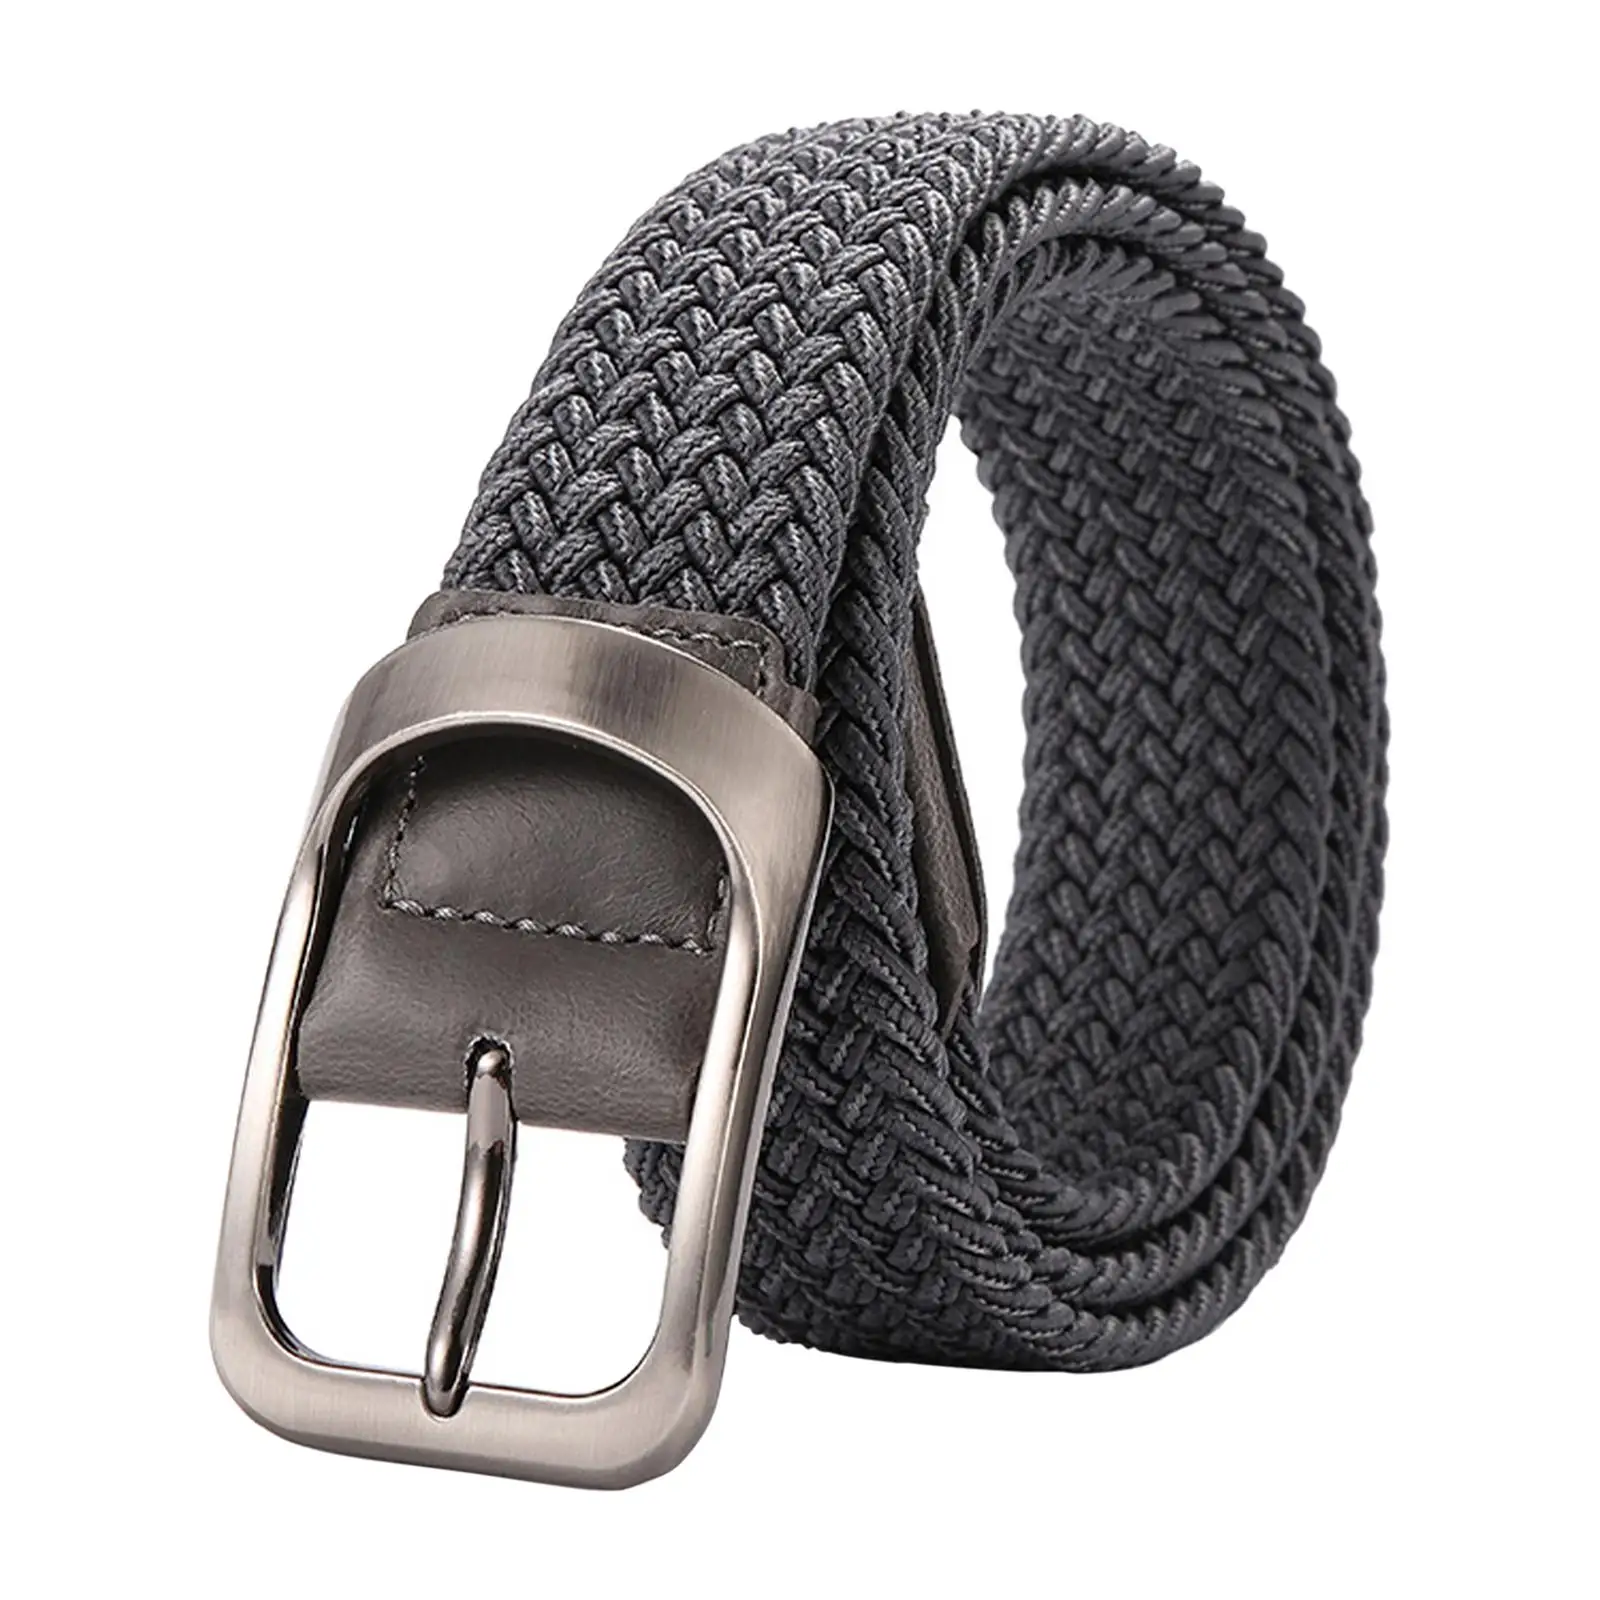 Elastic Casual Belt Fashion Accessory Men and Women for College Braided Waist Belt